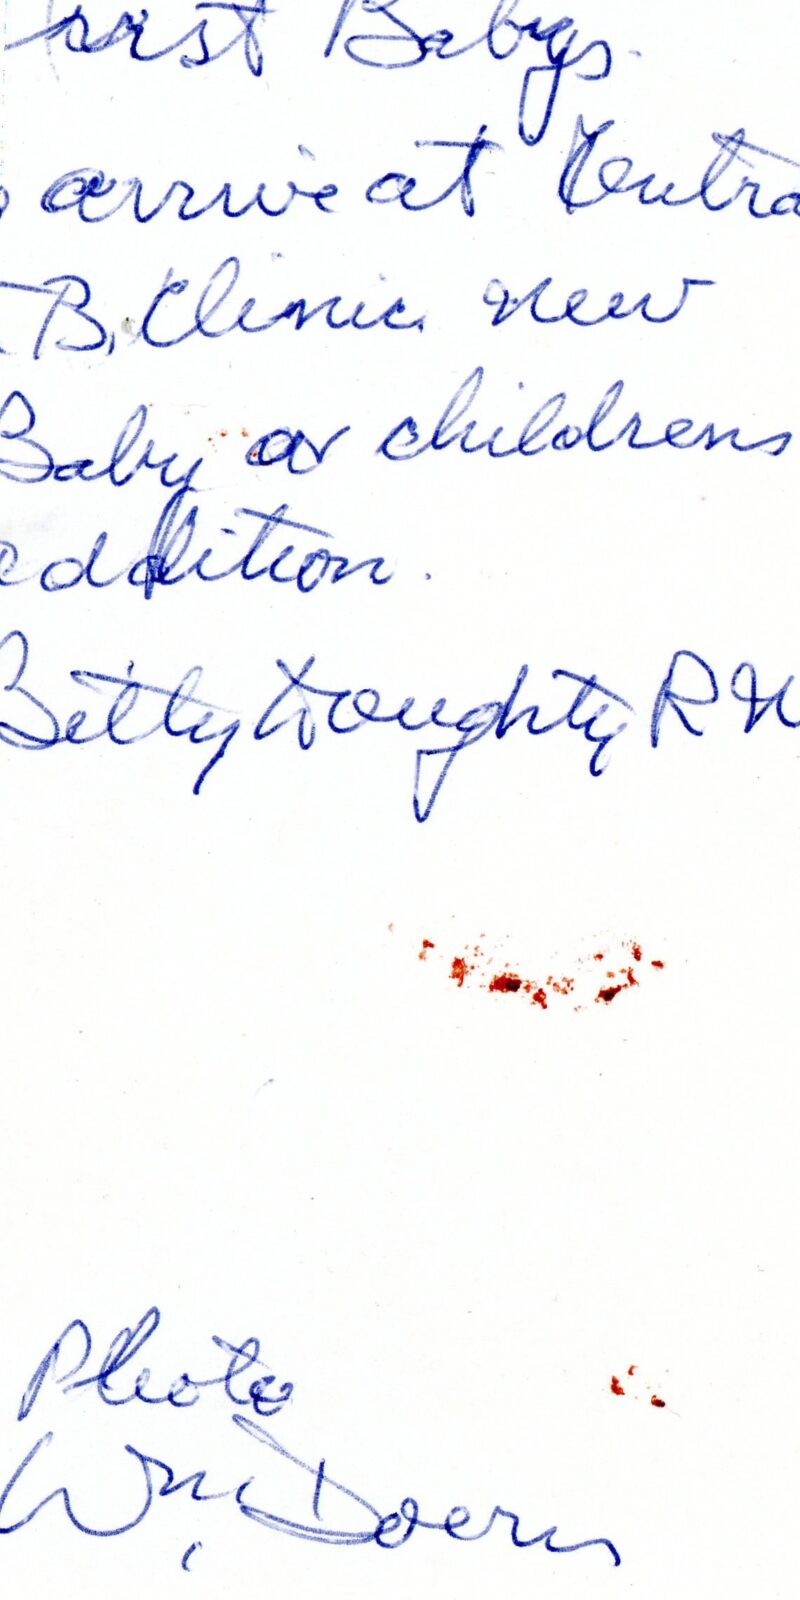 Verso: "First babys [sic] to arrive at Central T.B Clinic new baby or children’s addition. Betty Troughty [?] RN. // Photo Wm Doern [?]"